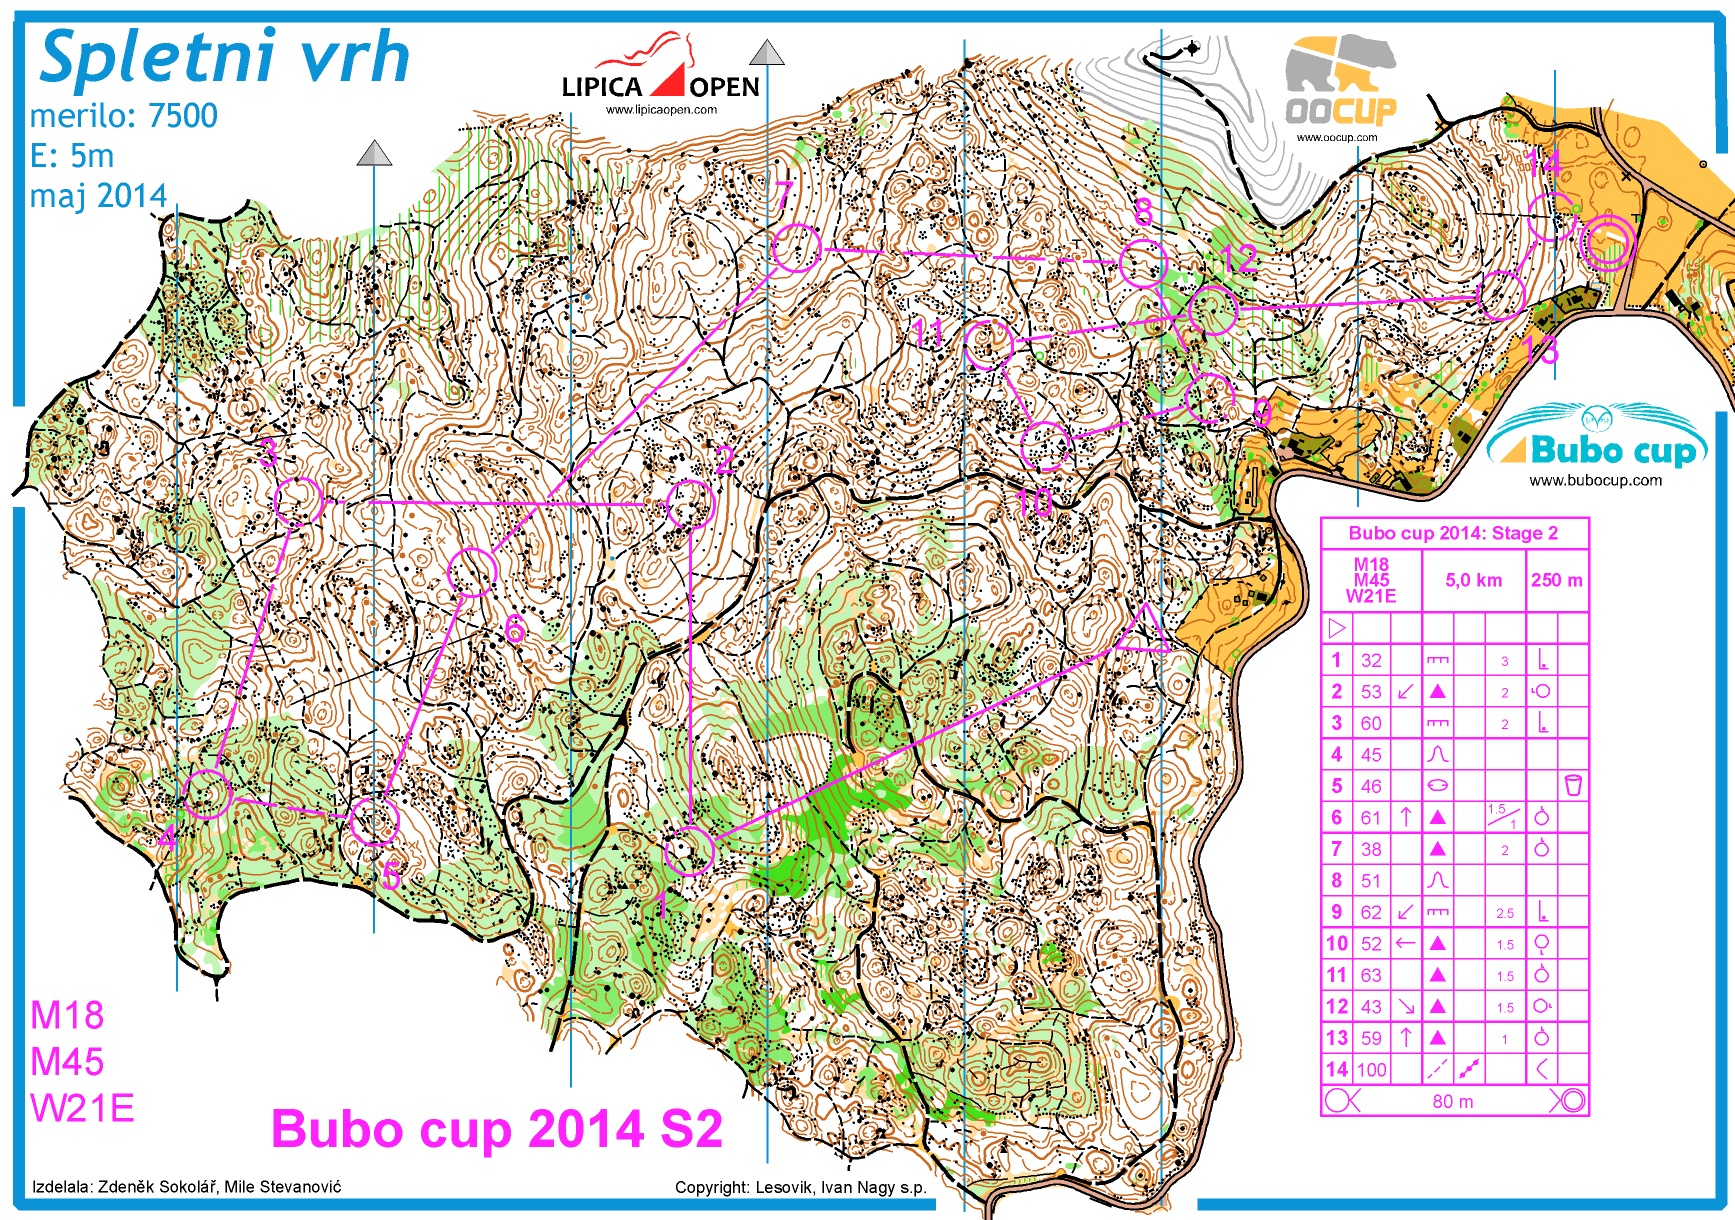 Bubo cup 2014 W21E Stage2 (24/07/2014)